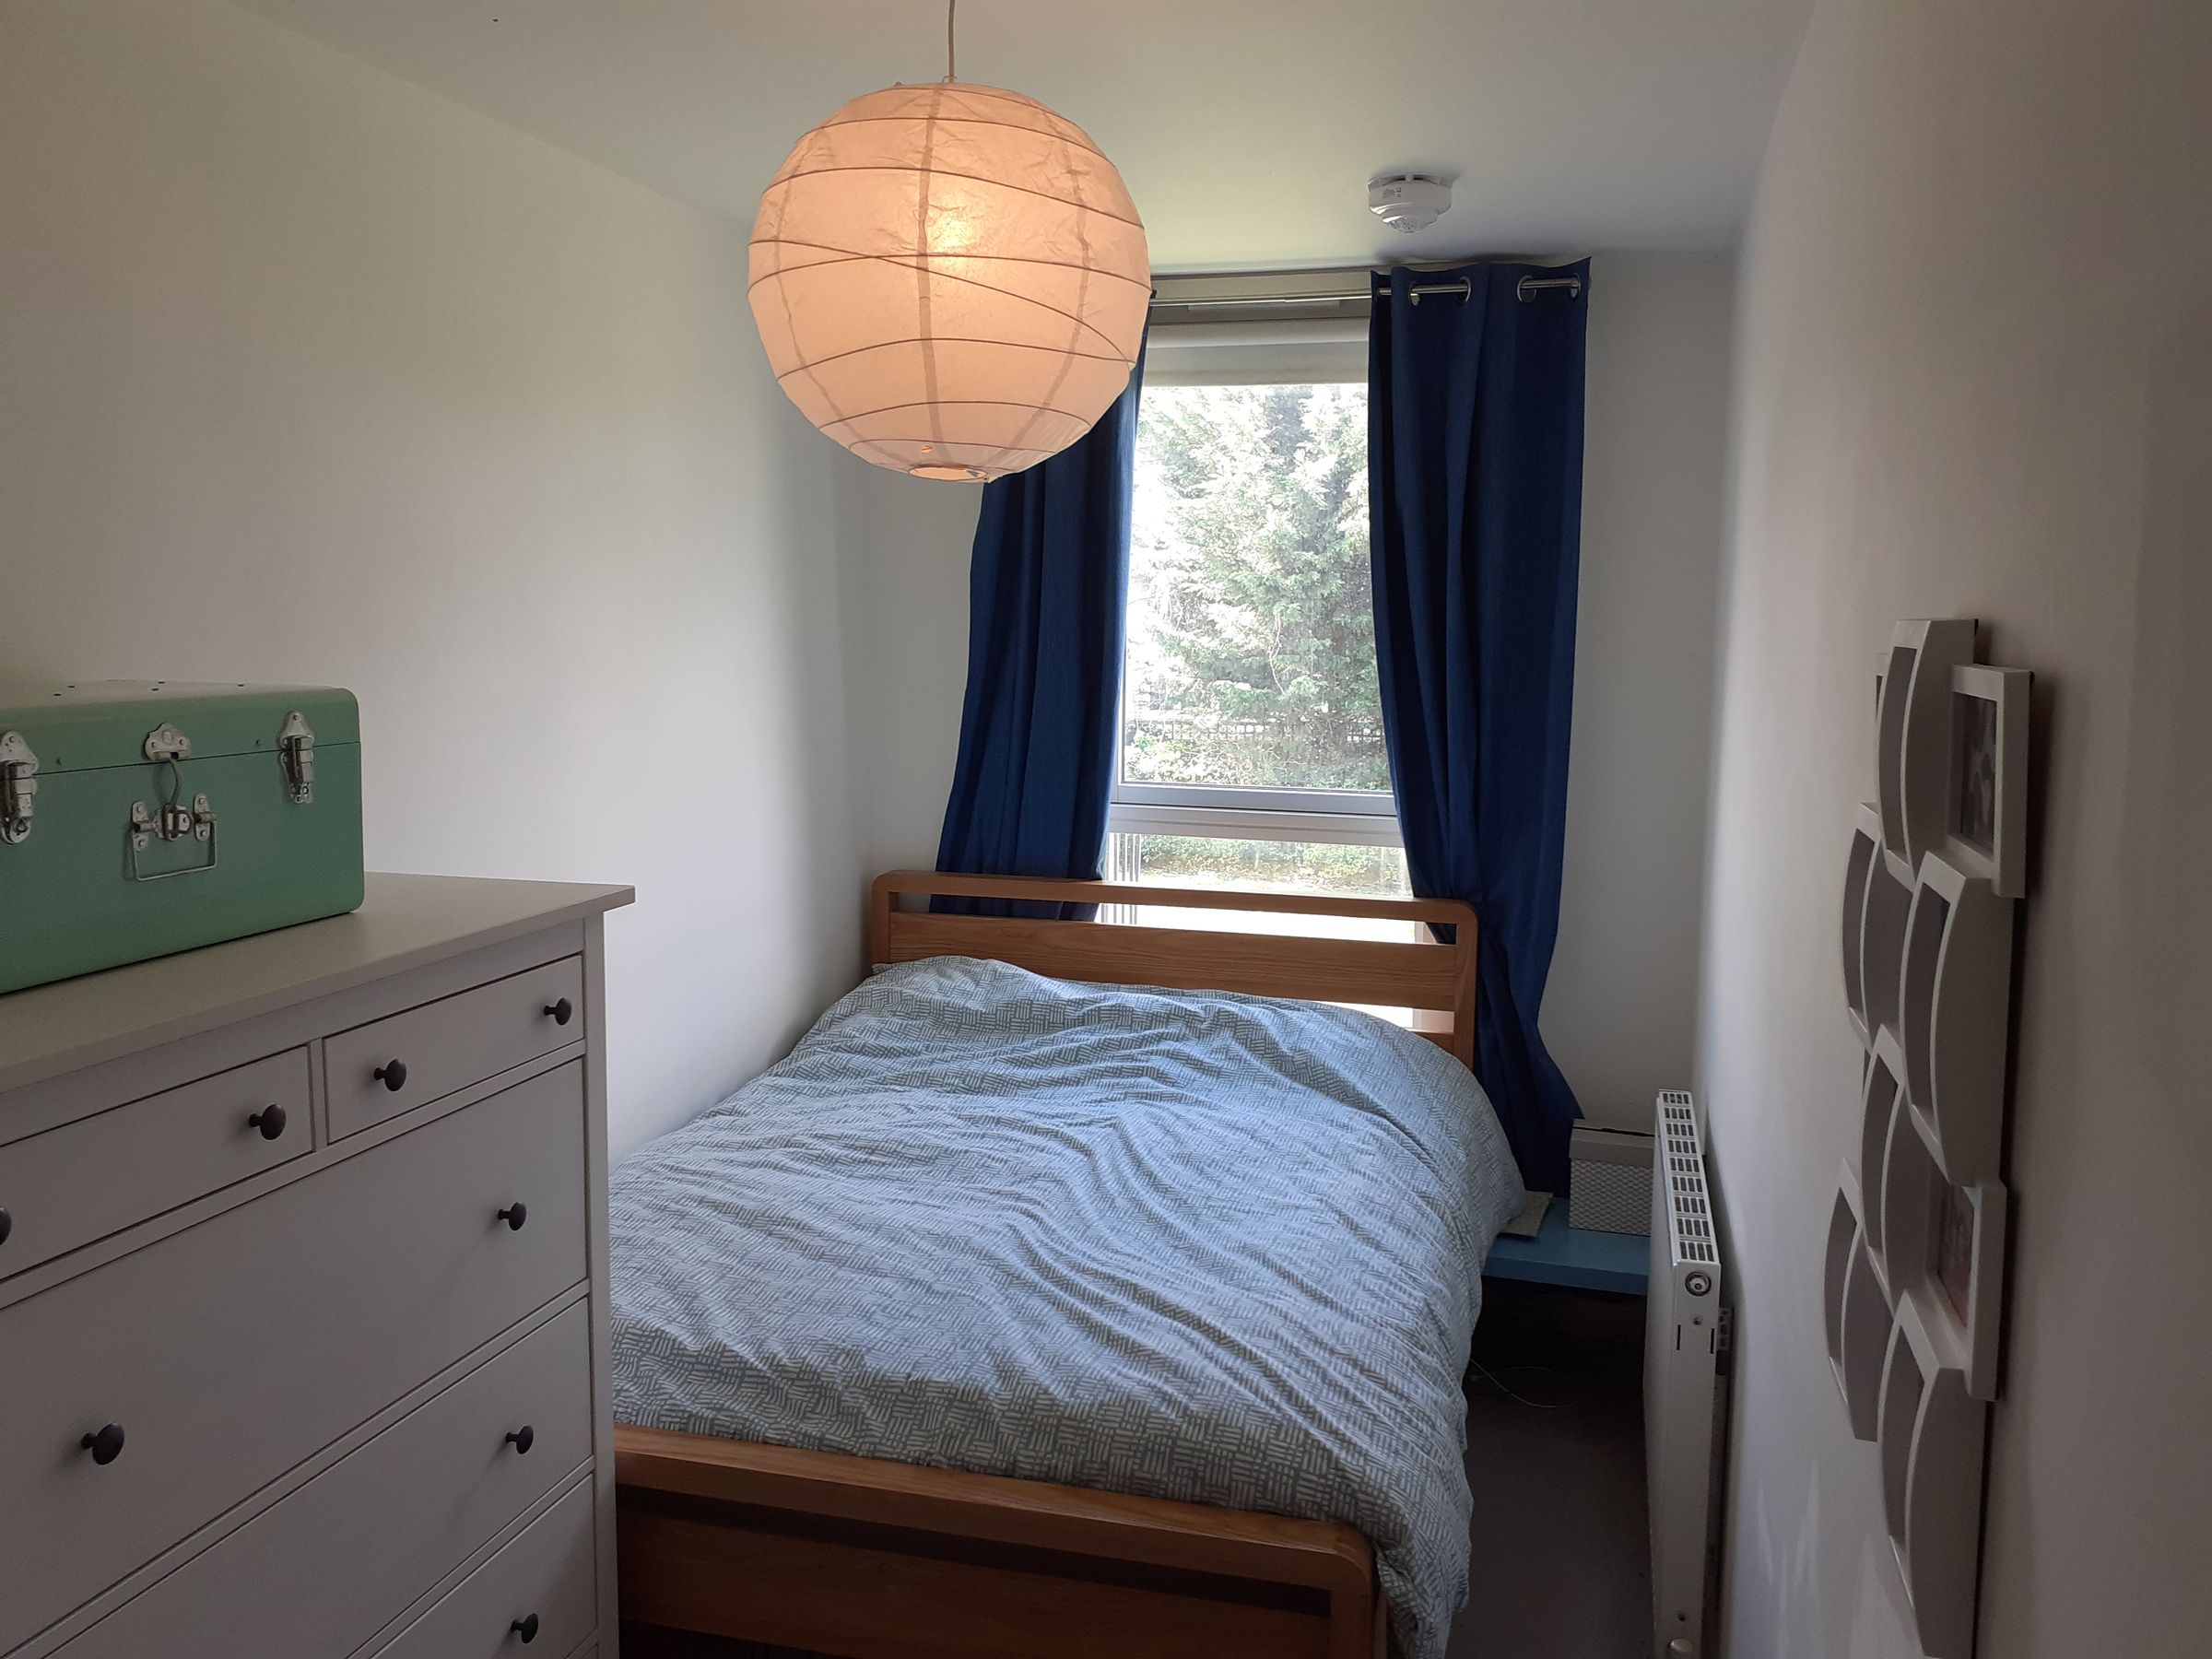 SW18 5AE – 2 bedroom apartment in Wandsworth – Share to Buy